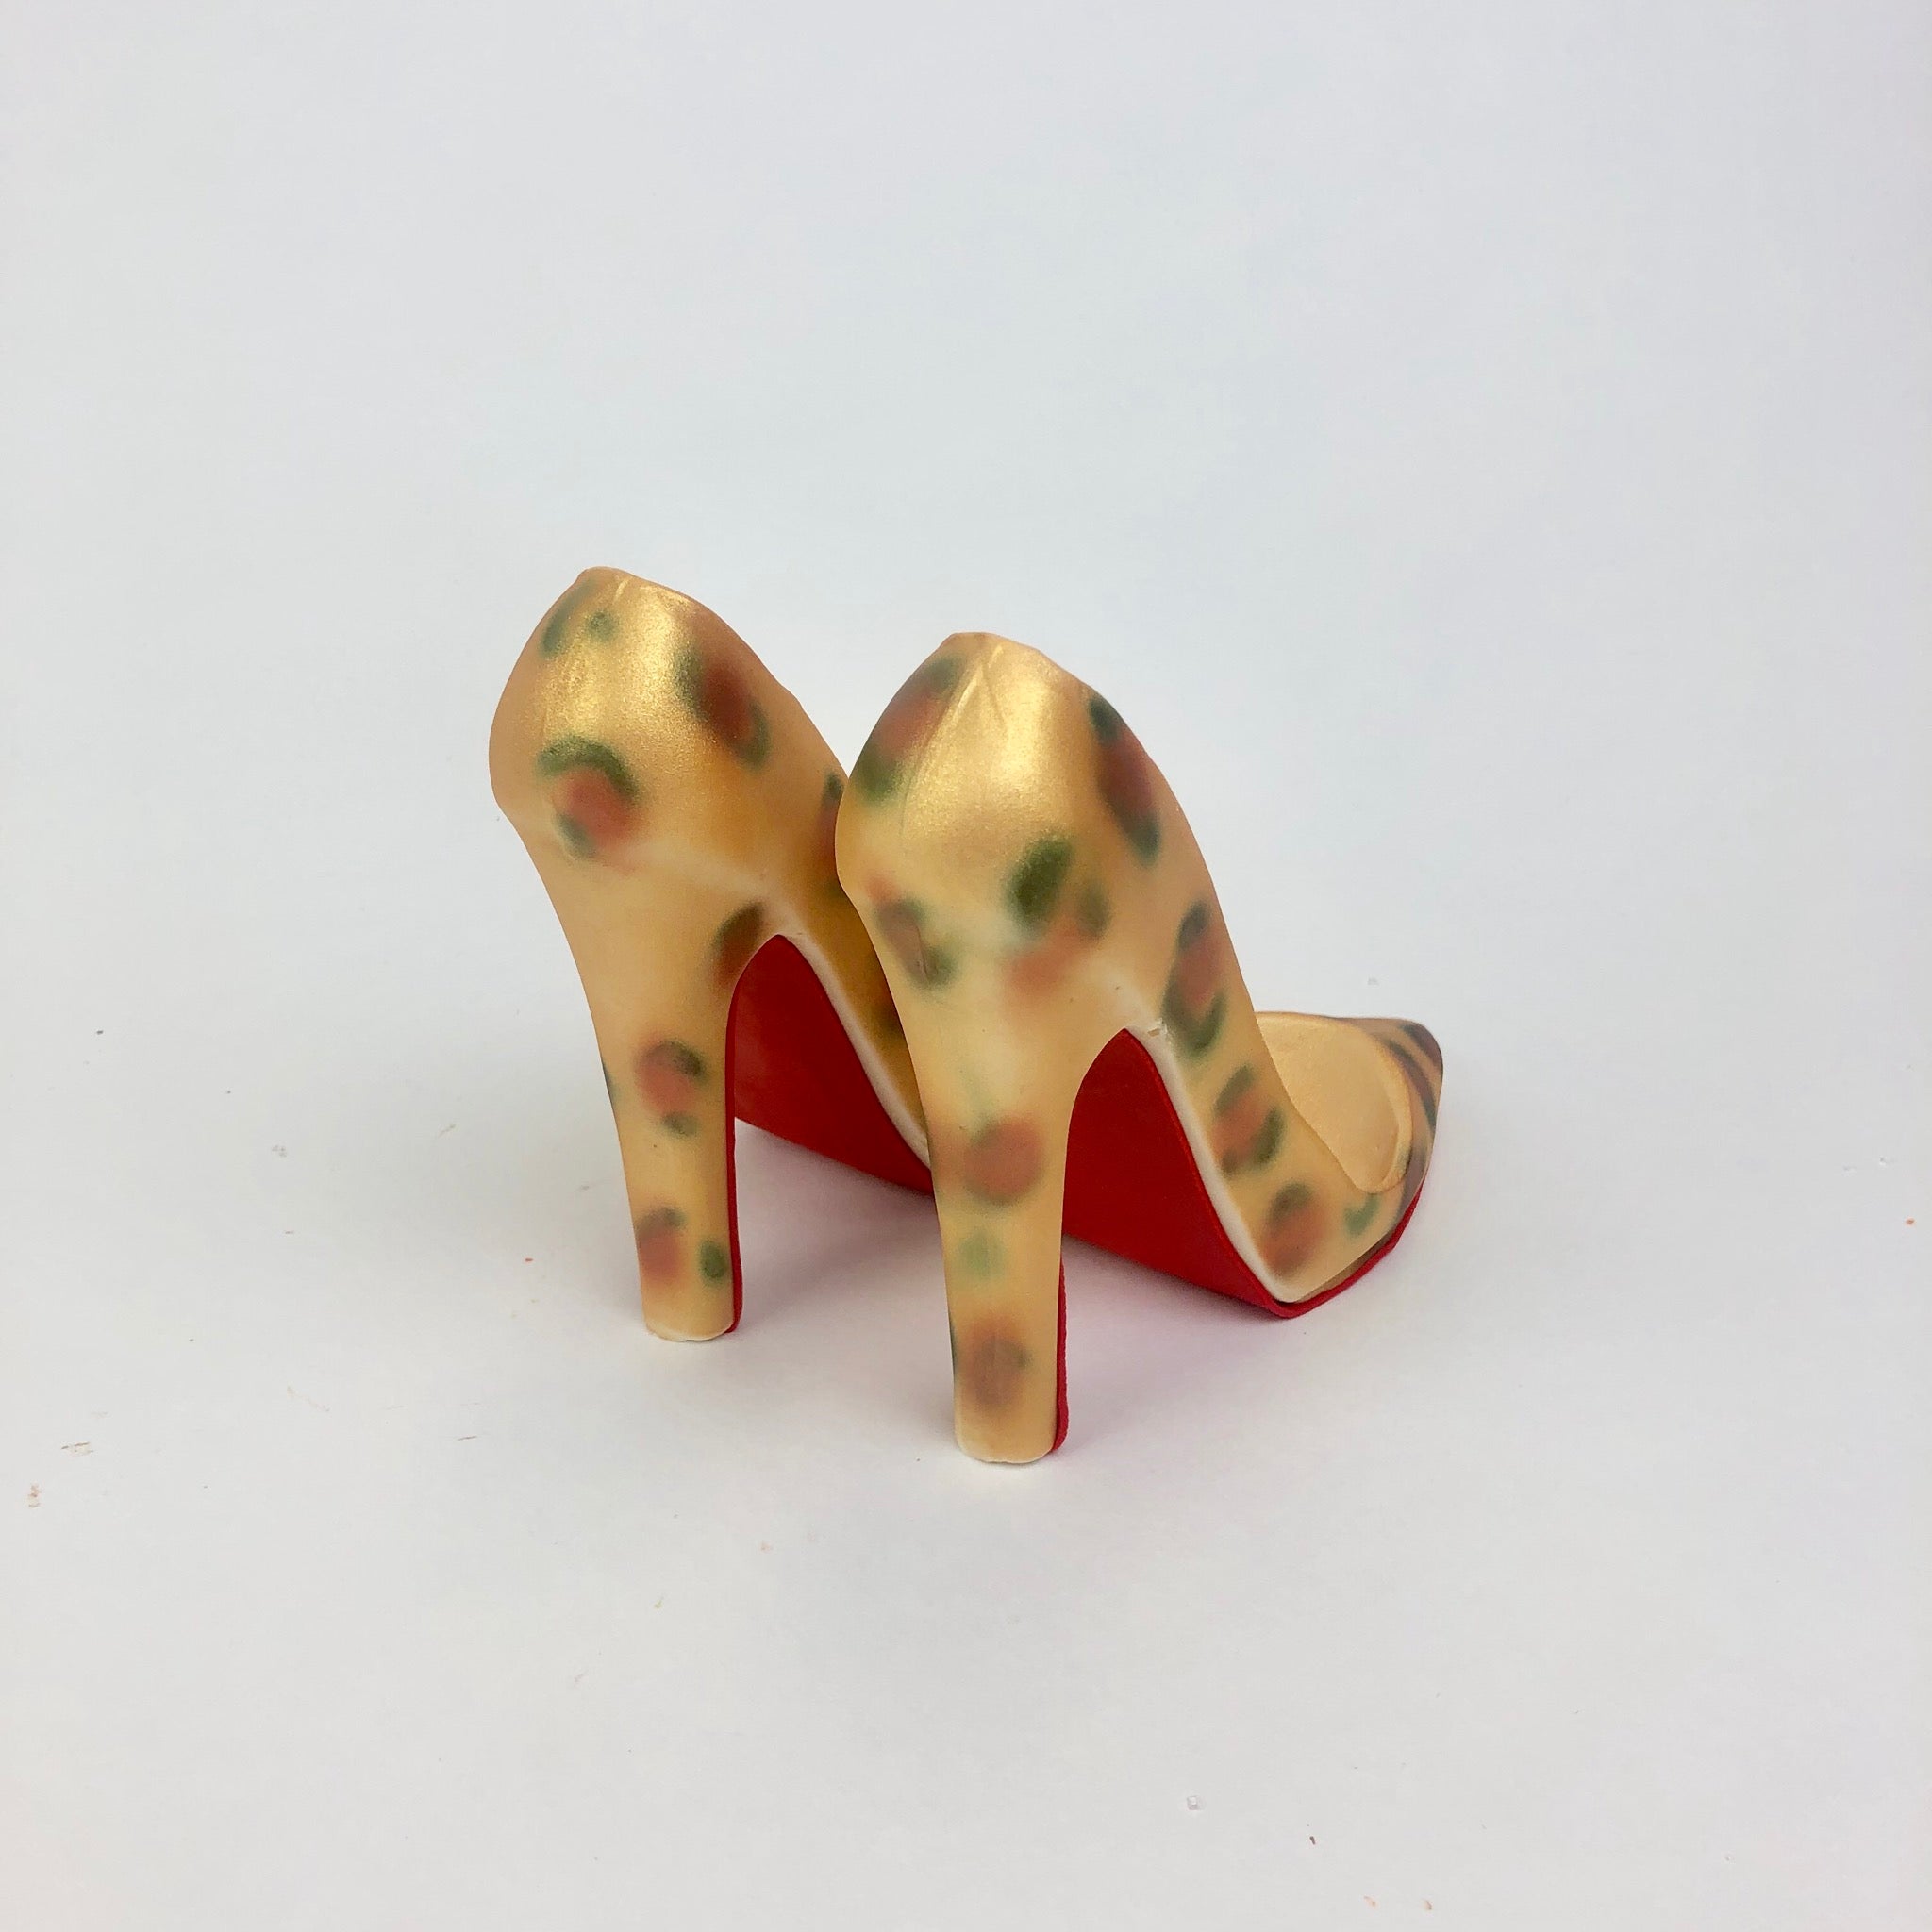 Leopard White Chocolate Stiletto Shoe with Red Bottom